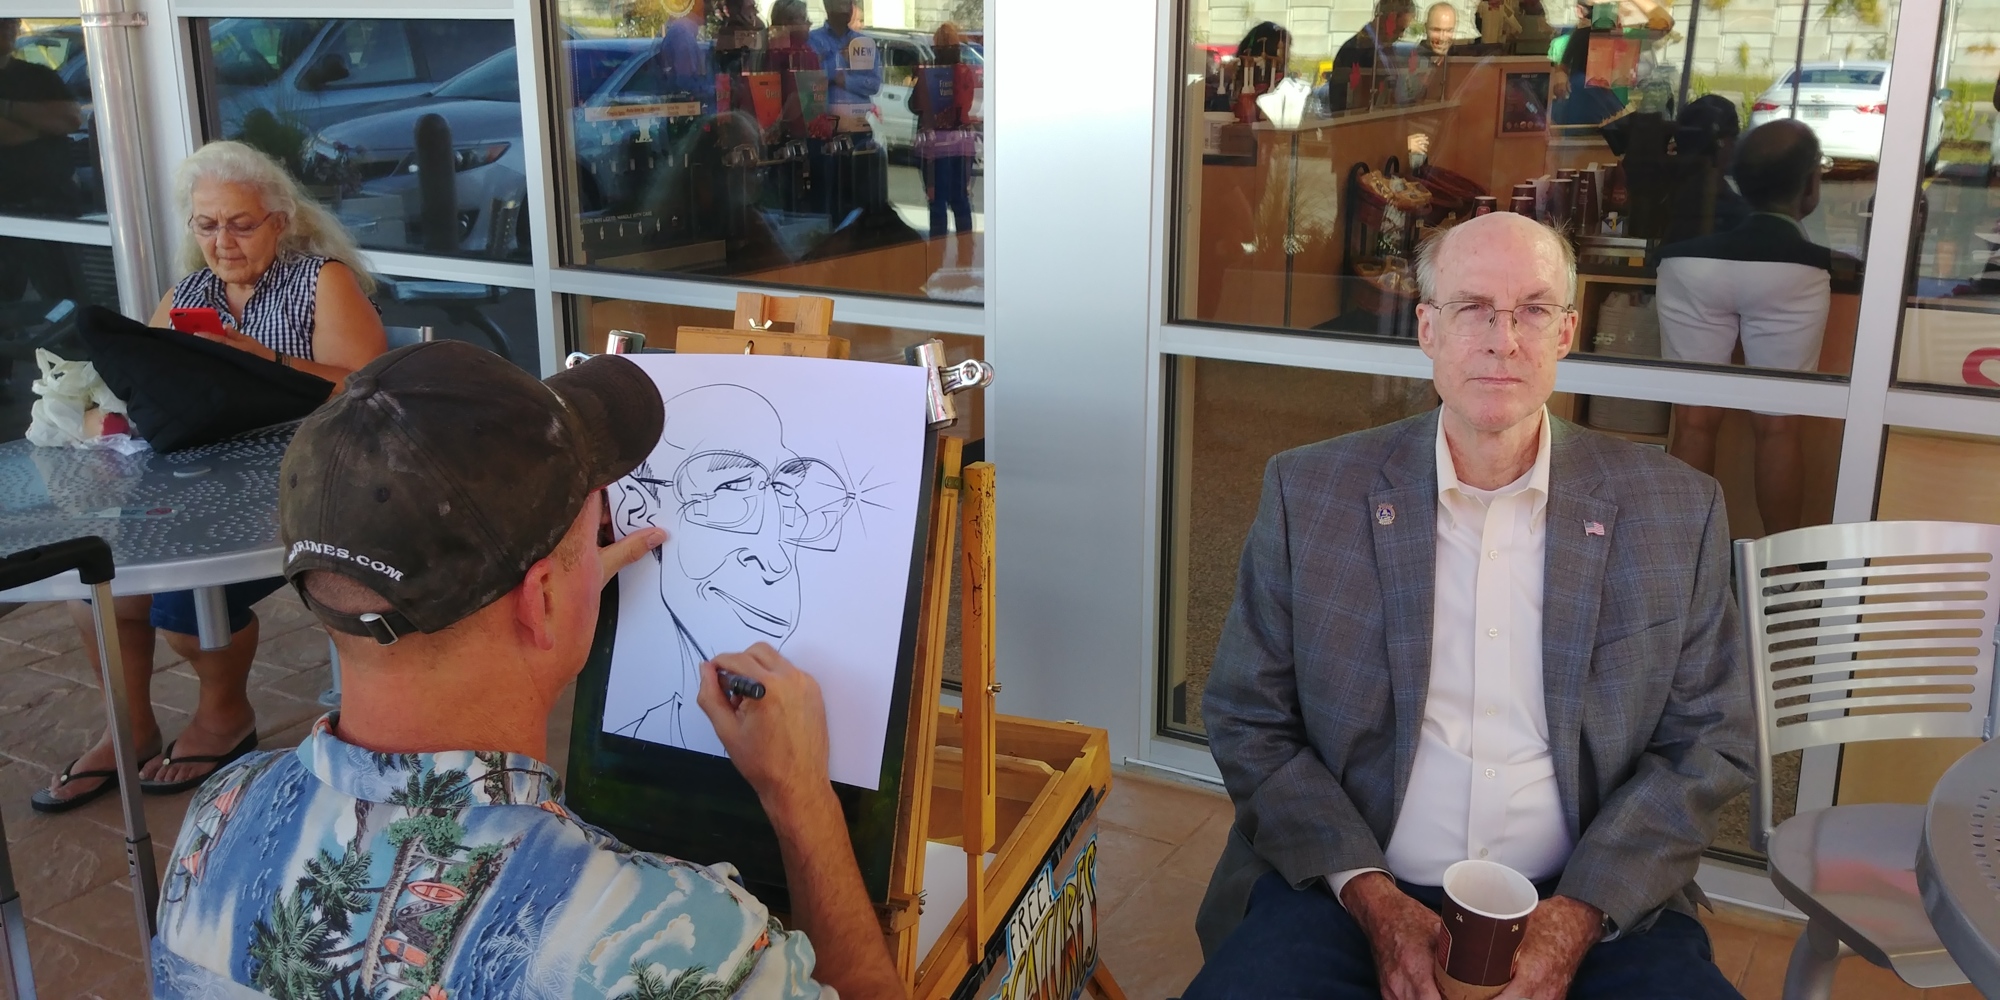 Jacksonville City Council member Matt Schellenberg sits for a caricature at the grand opening.